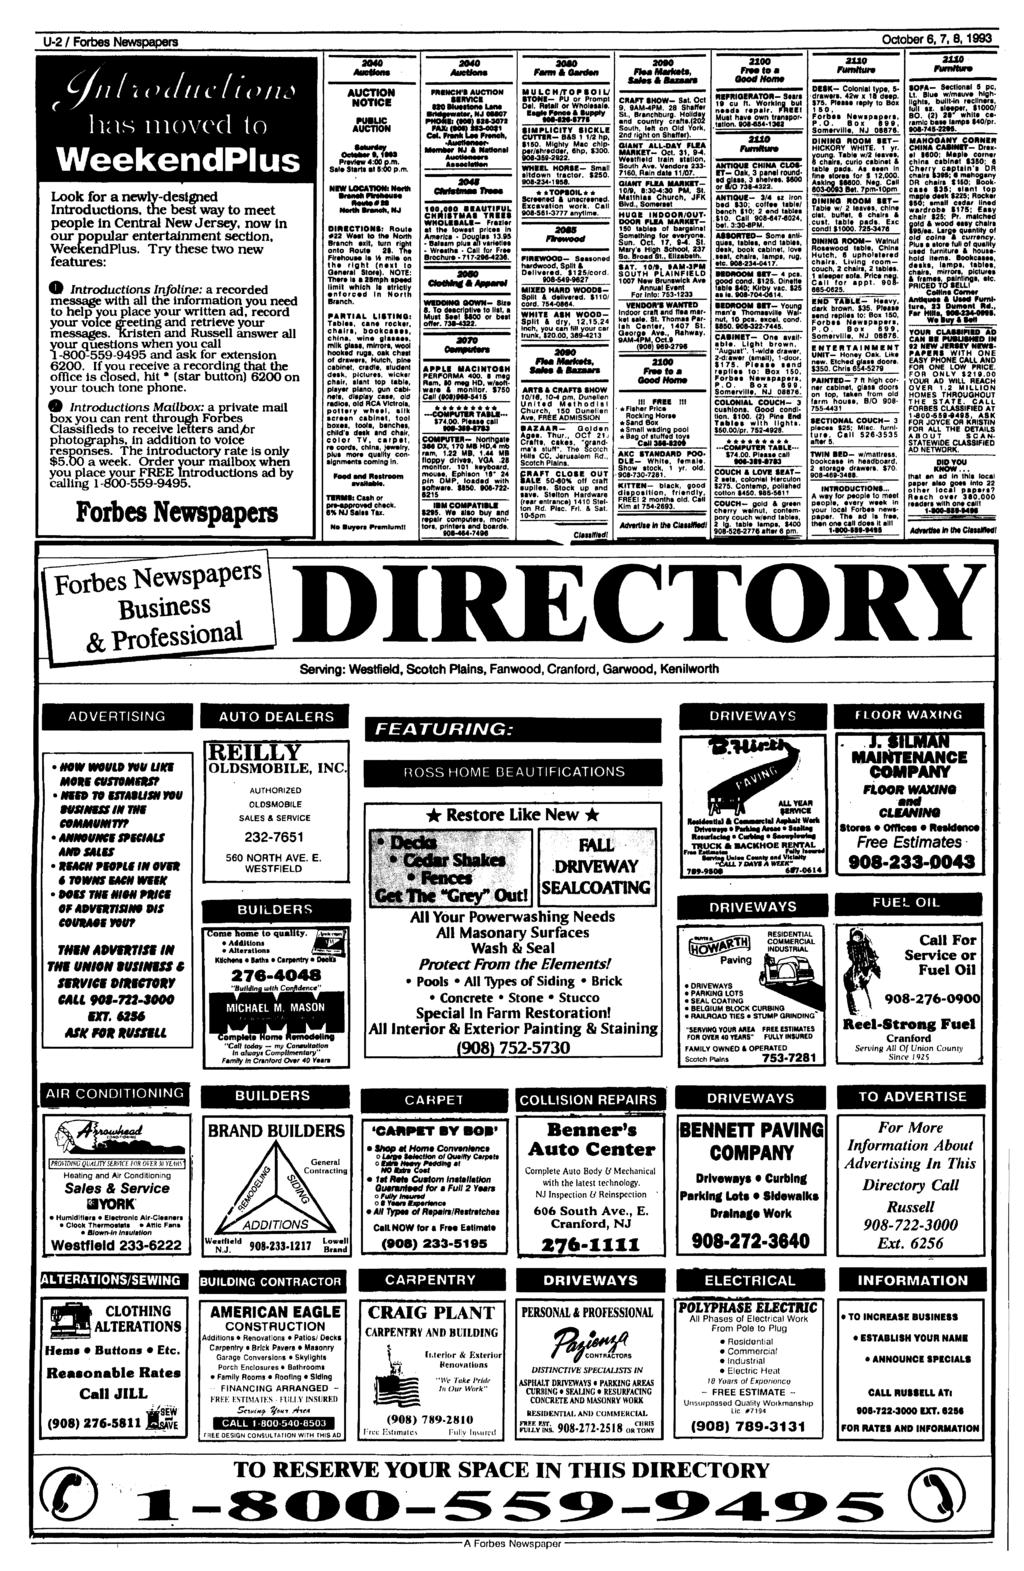 U-2 / Forbes Newspapers October 6, 7, 8,1993 ("IIII XiUltlC I tojld has moved to WeekendPlus Look for a newly-( Introductions, the best way to meet people In Central New Jersey, now in our popular